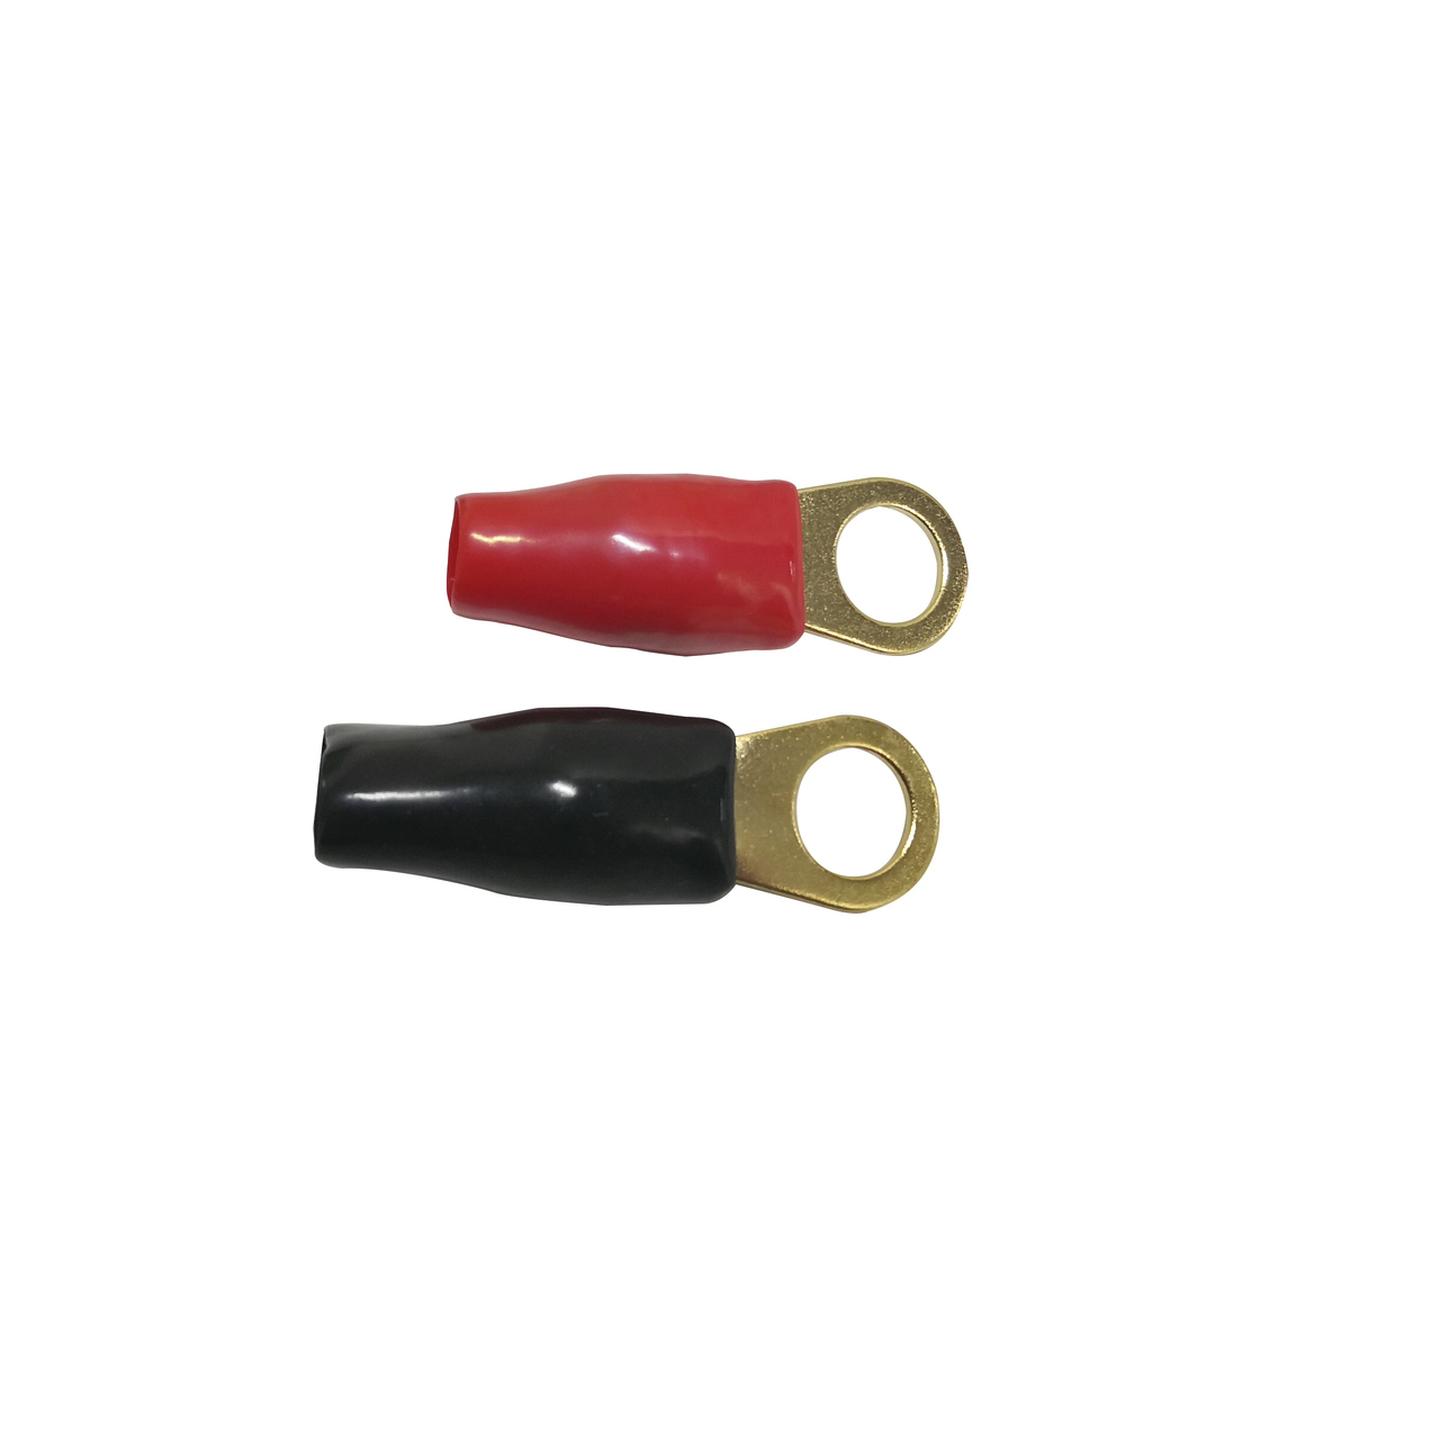 Gold Plated Crimp Connector 8.5mm Eye Red and Black Pair